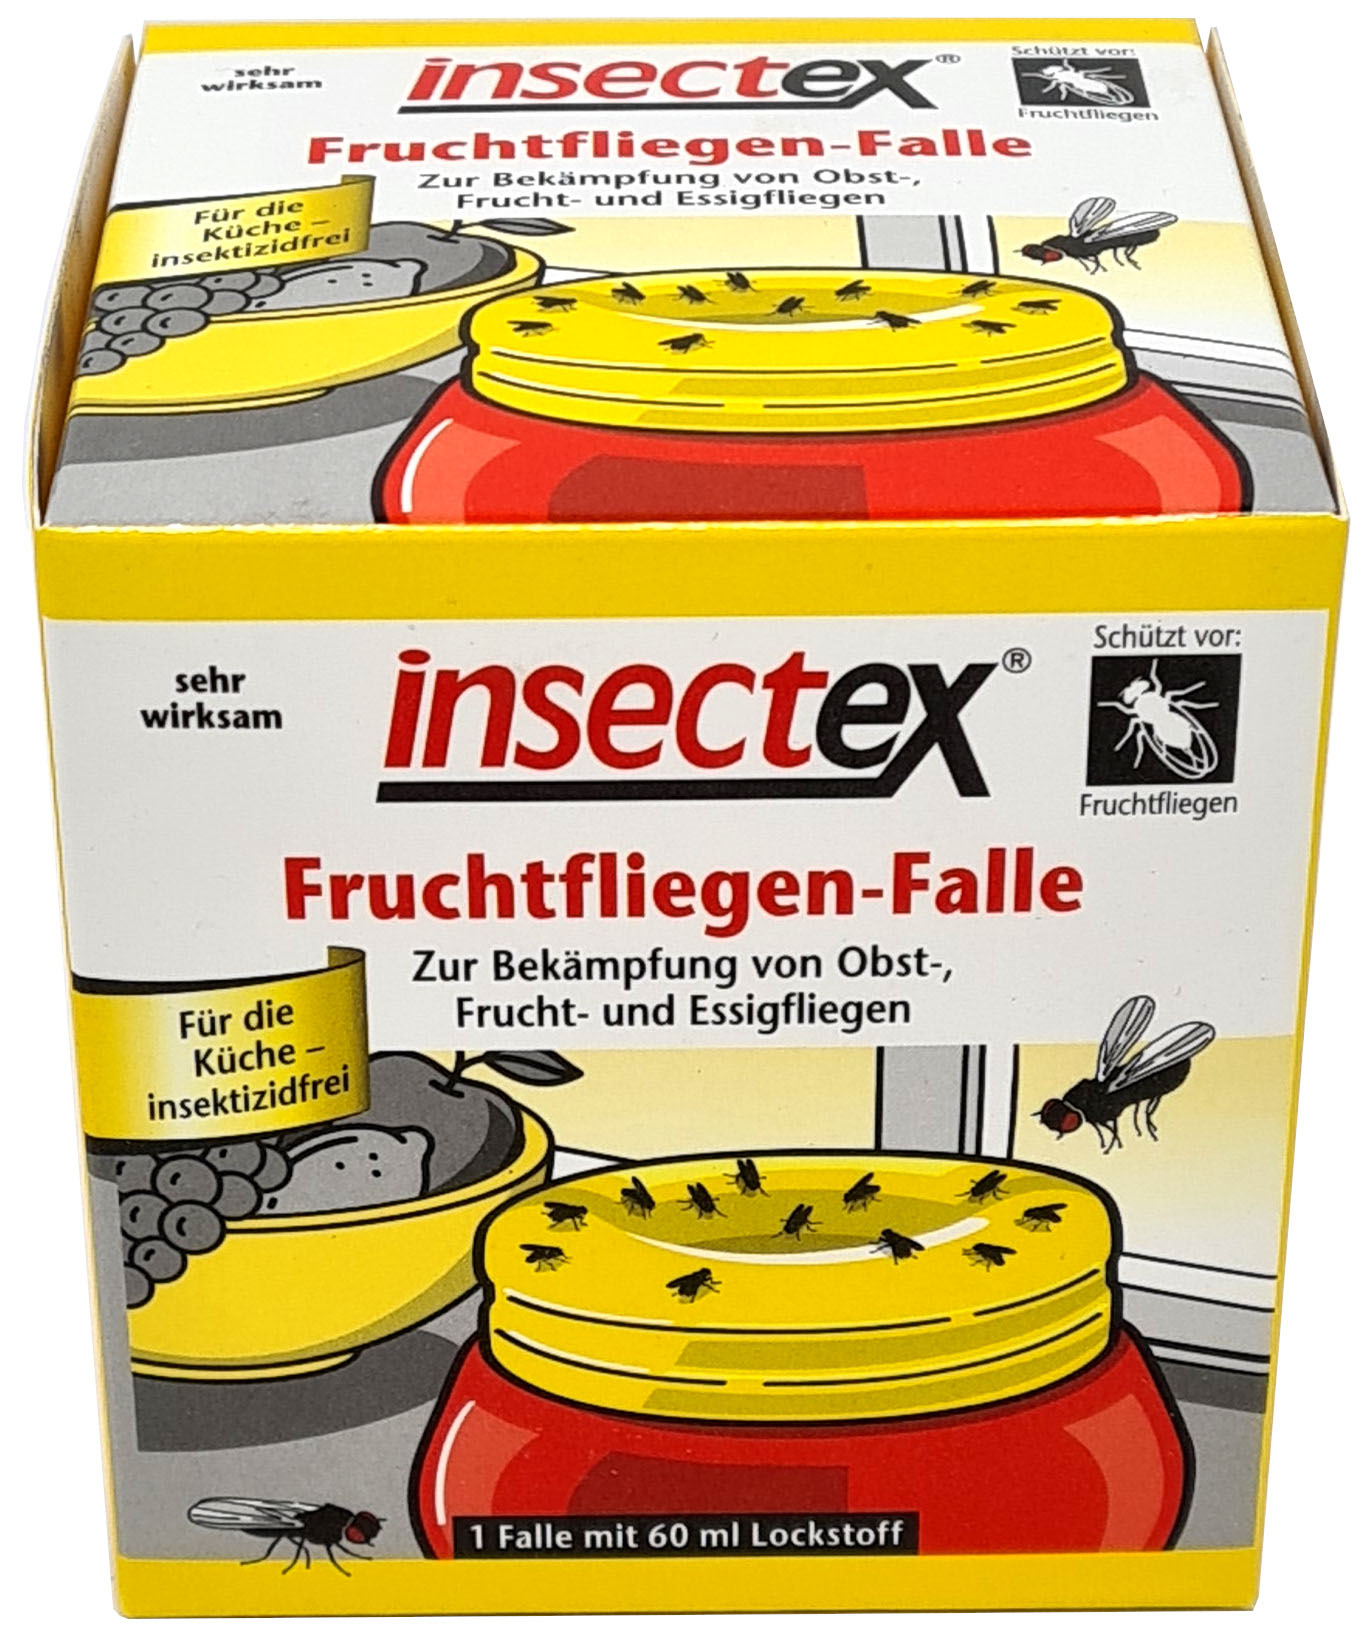 02166 - Fruit fly trap 15 ml with glue trap, sales only in Germany, biocide